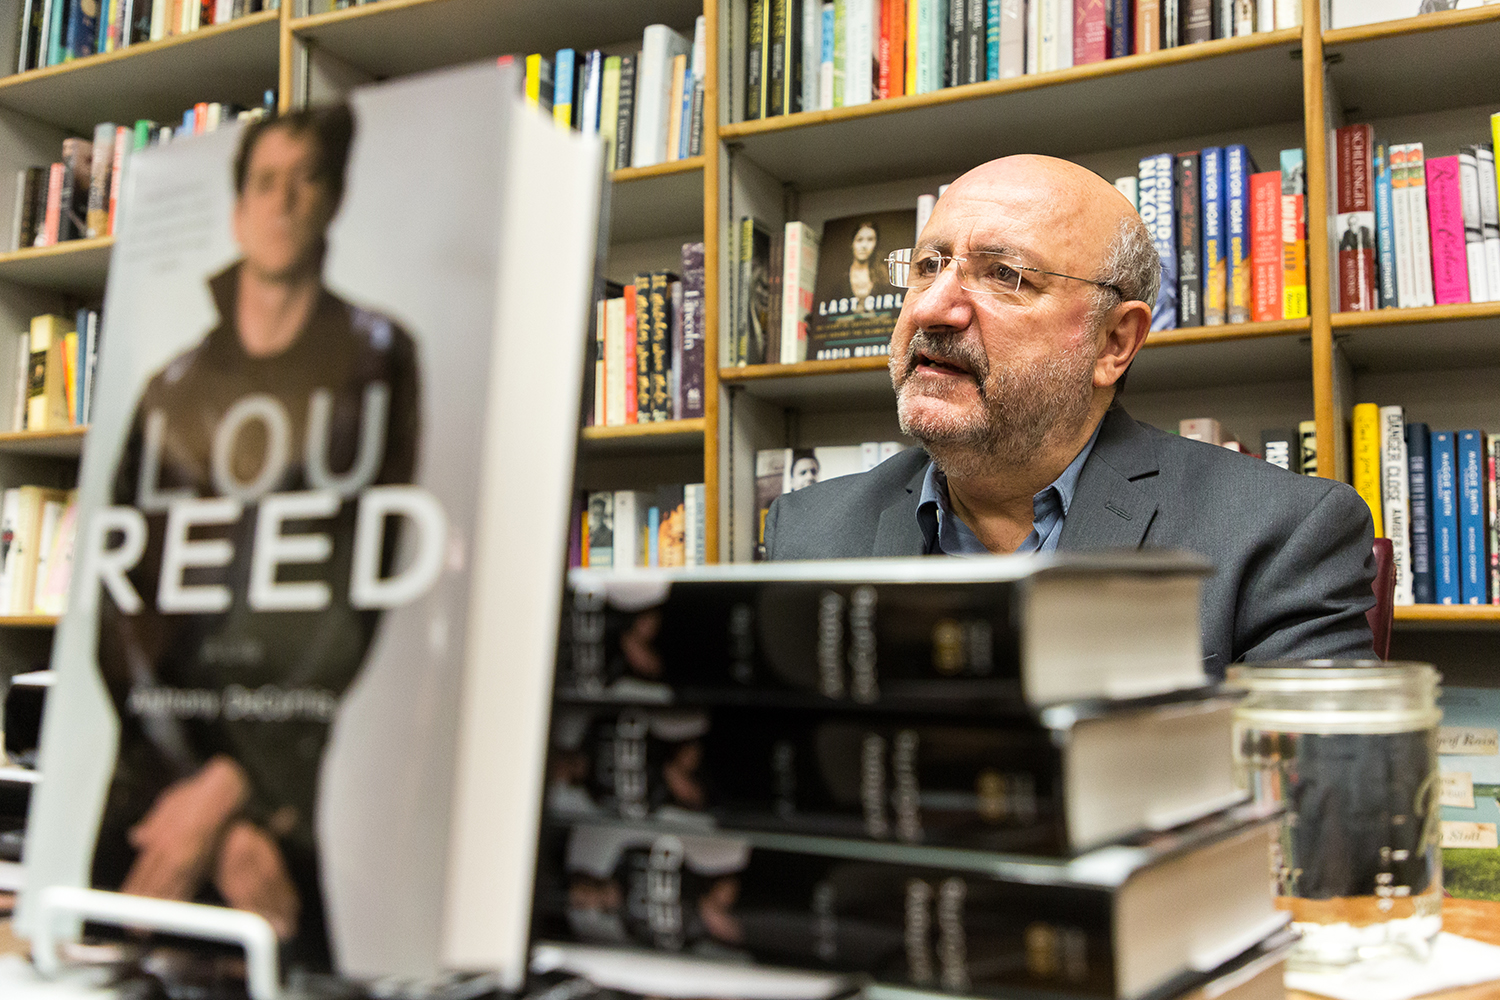  Anthony Decurtis speaks to patrons at Prairie Lights bookstore after giving a reading from and answering questions about his new biography titled “Lou Reed: A Life” on Monday, Nov. 13, 2017.  